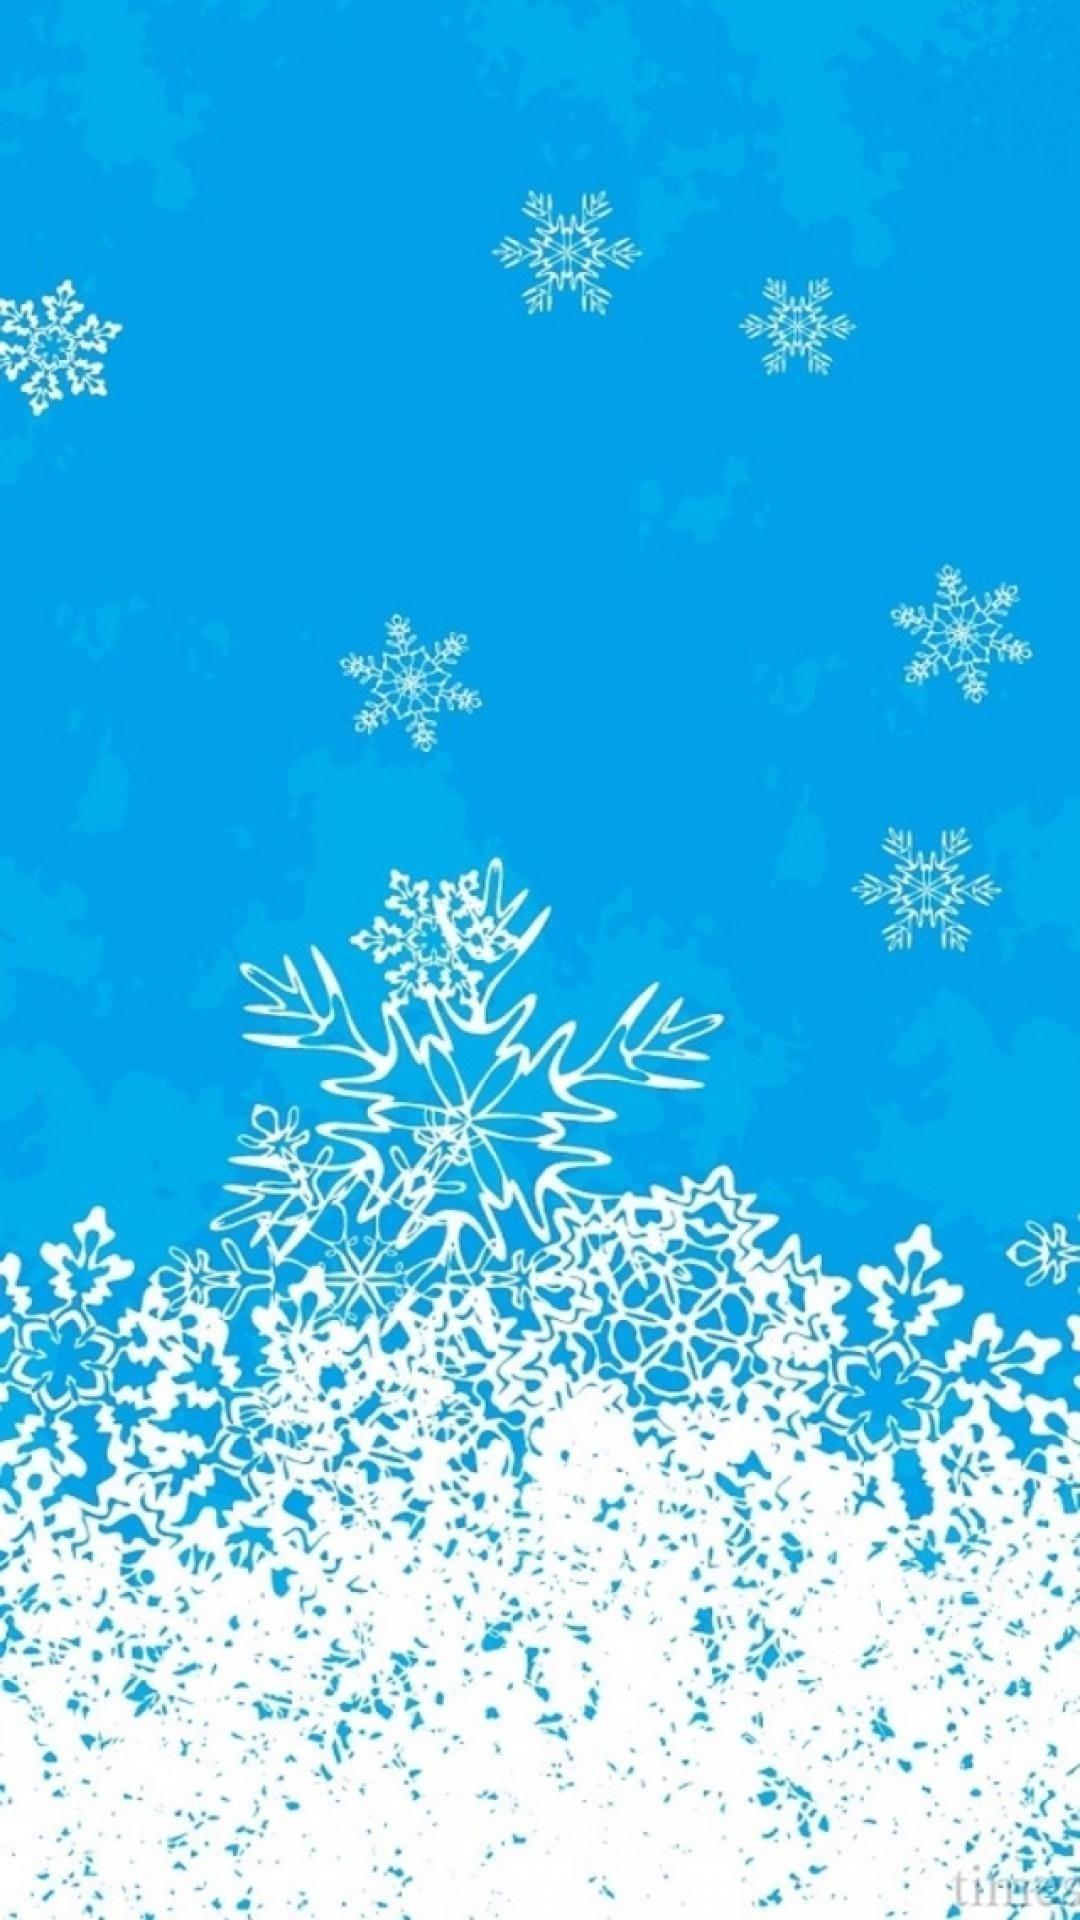 Merry Christmas Snowflake Backgrounds iPhone 6 wallpapers